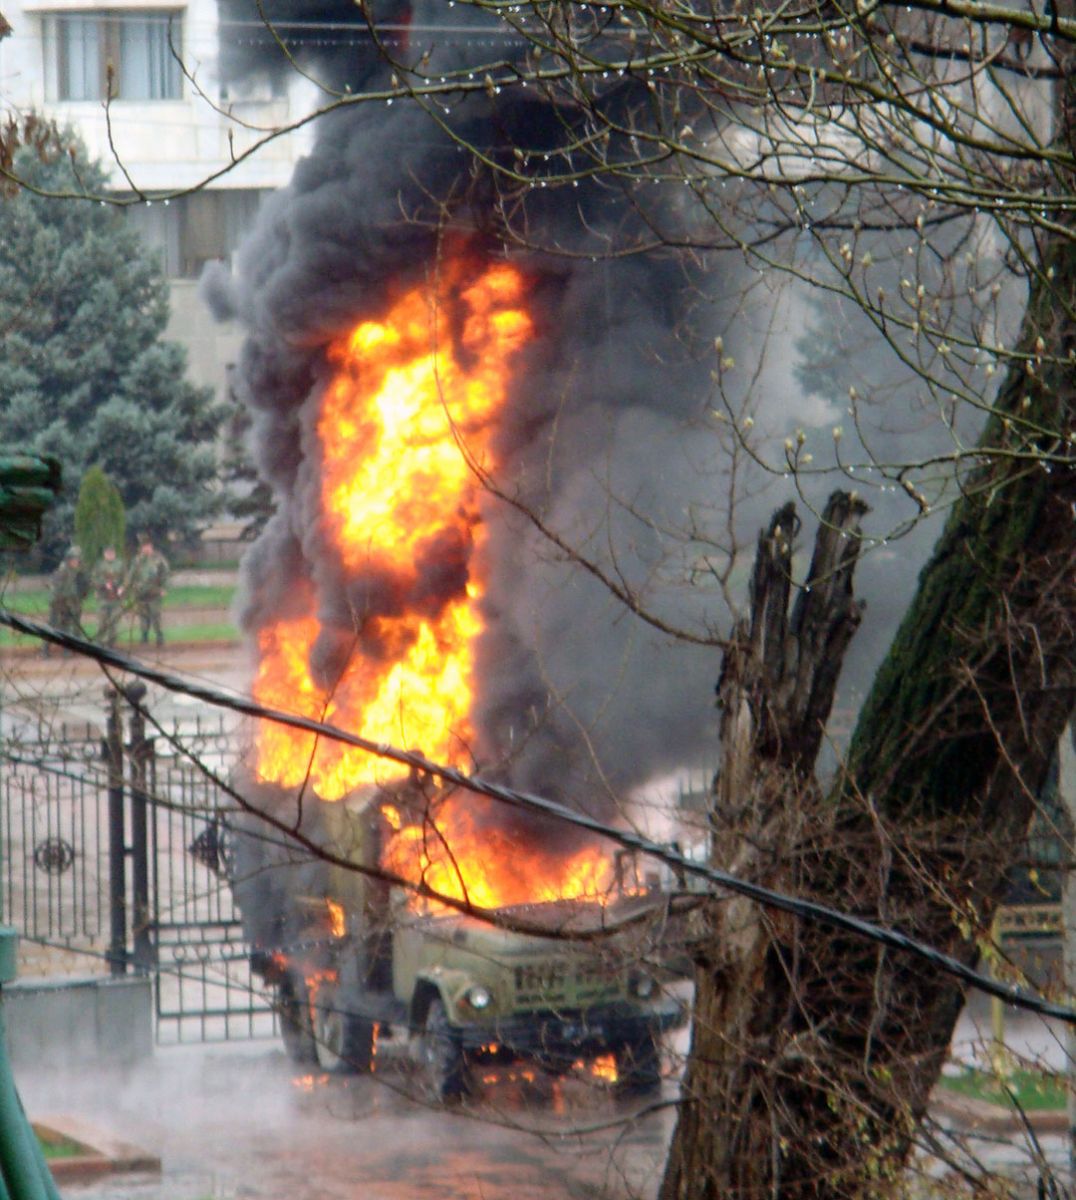 Truck set on fire during the April 2010 riots in Bishkek